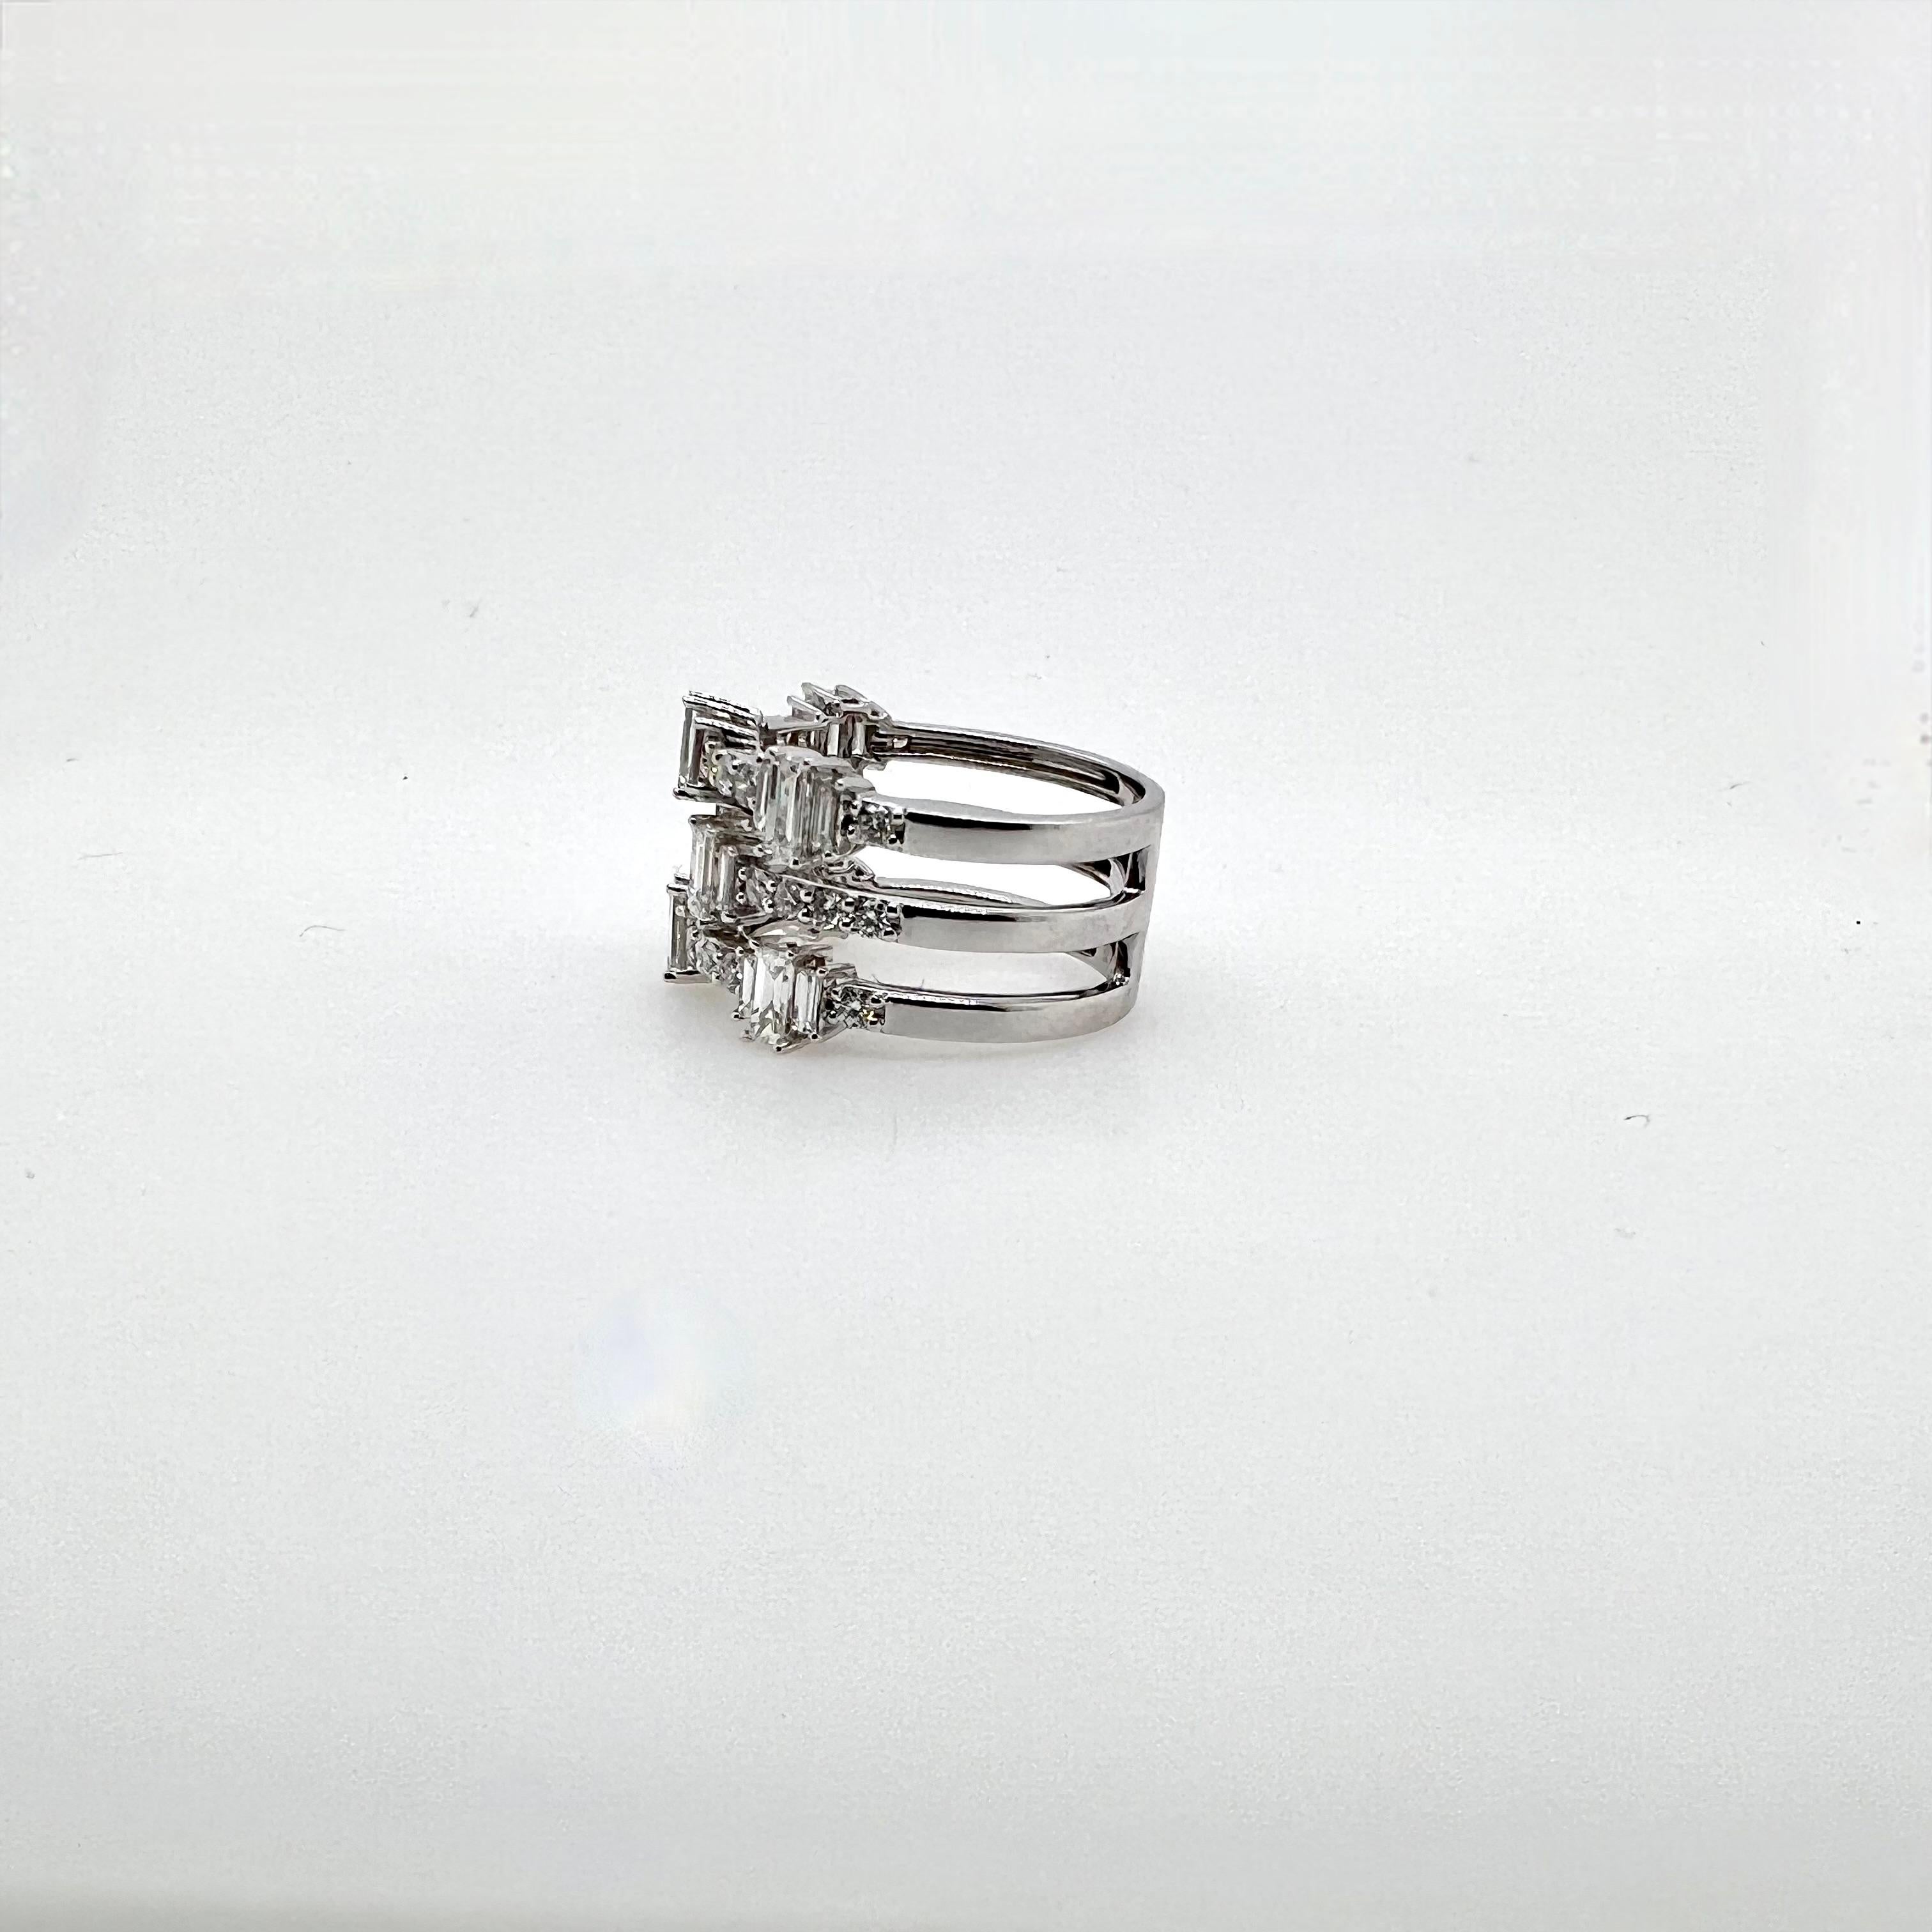 This stunning 3 row diamond band is an eye catcher!  The 18k white gold band is made up with round brilliants, emerald cuts, and baguettes diamonds with a modern look.  A versatile ring that can be worn casually or business casual!  

Diamonds: 